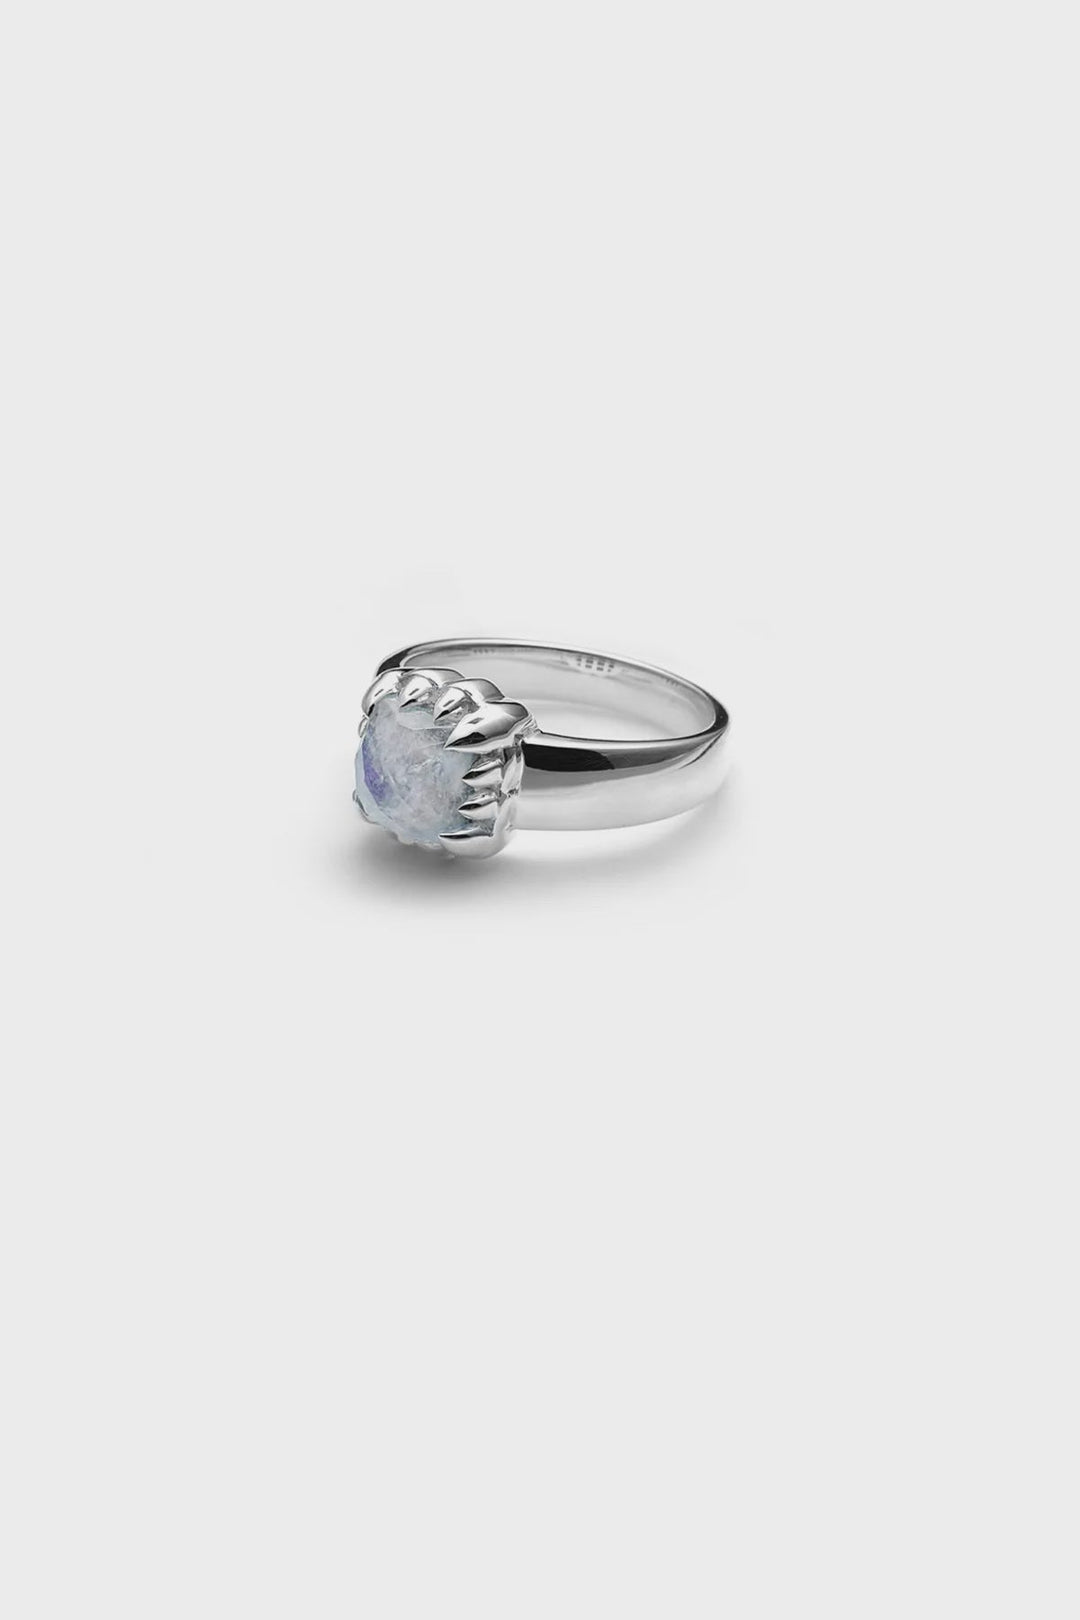 Baby Claw Ring - Moonstone - Chillis & More NZ